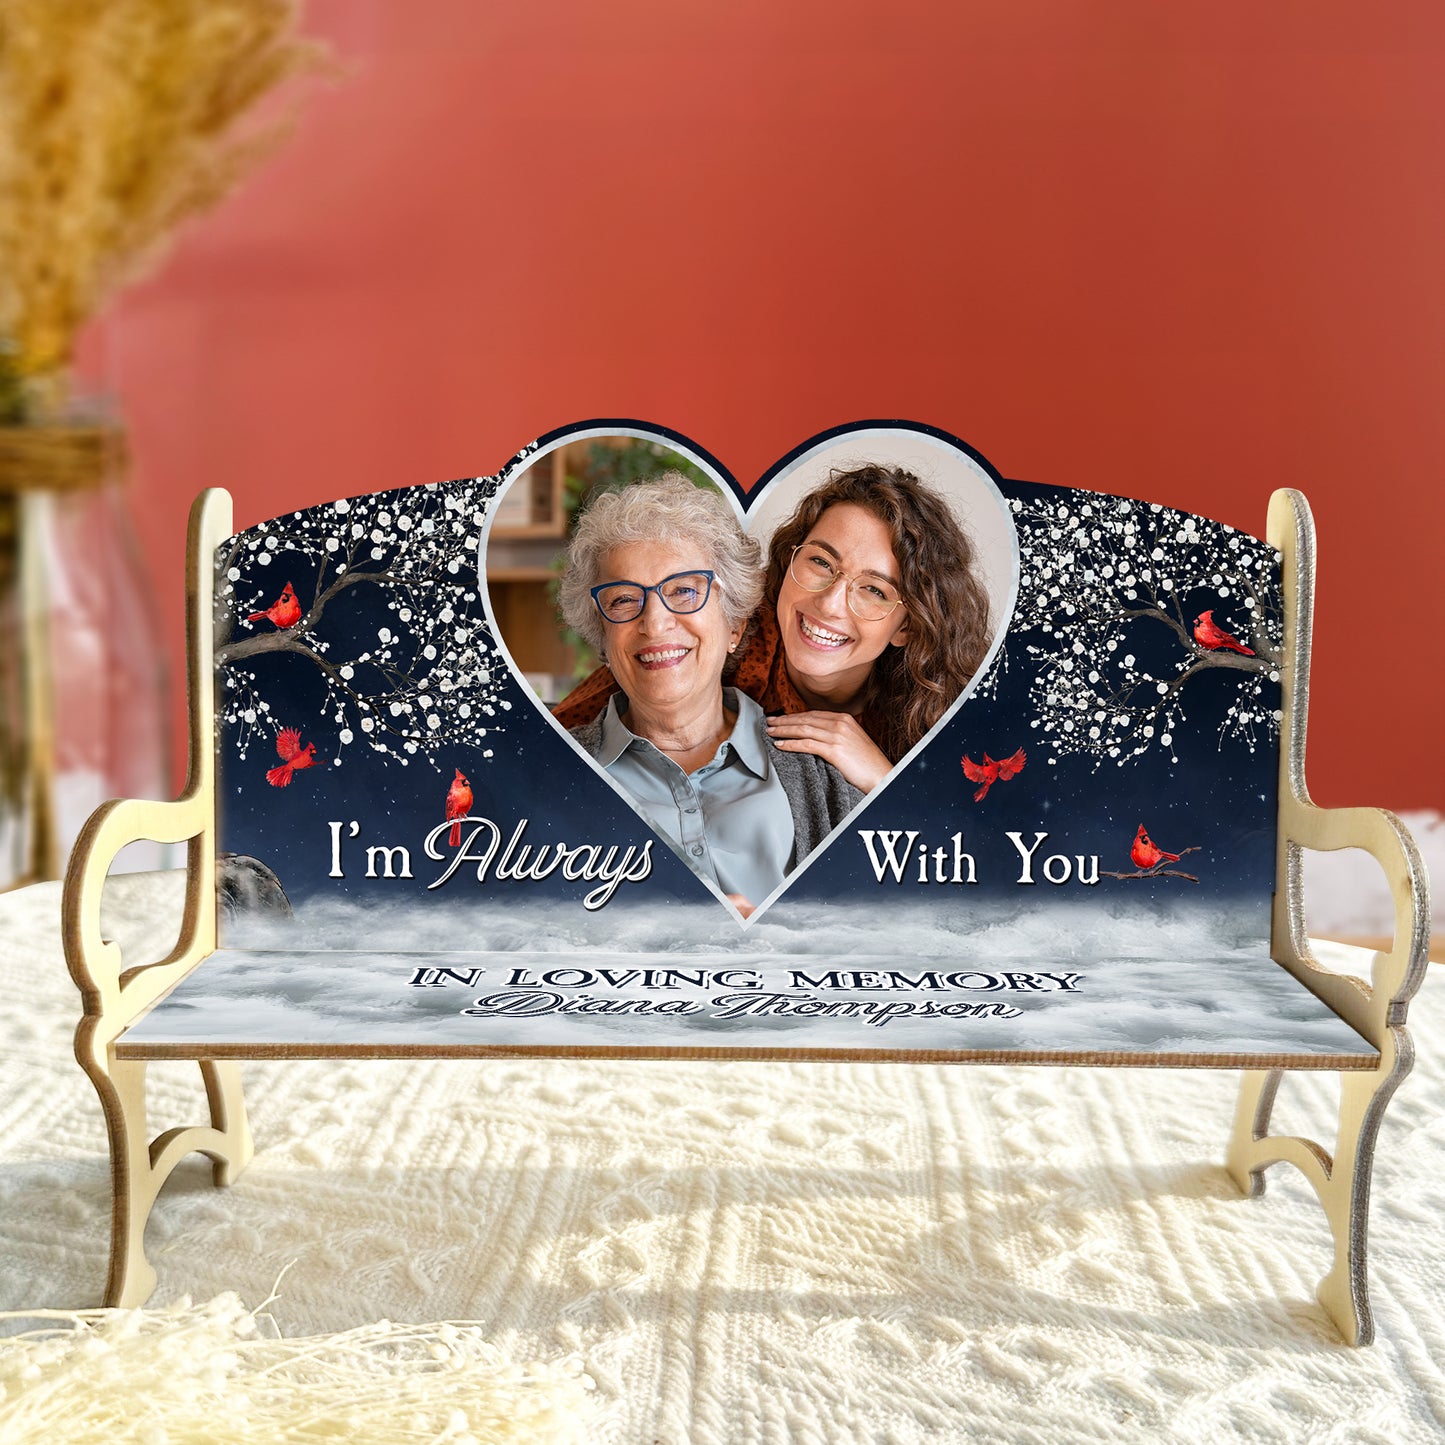 I'm Always With You - Personalized Photo Memorial Bench